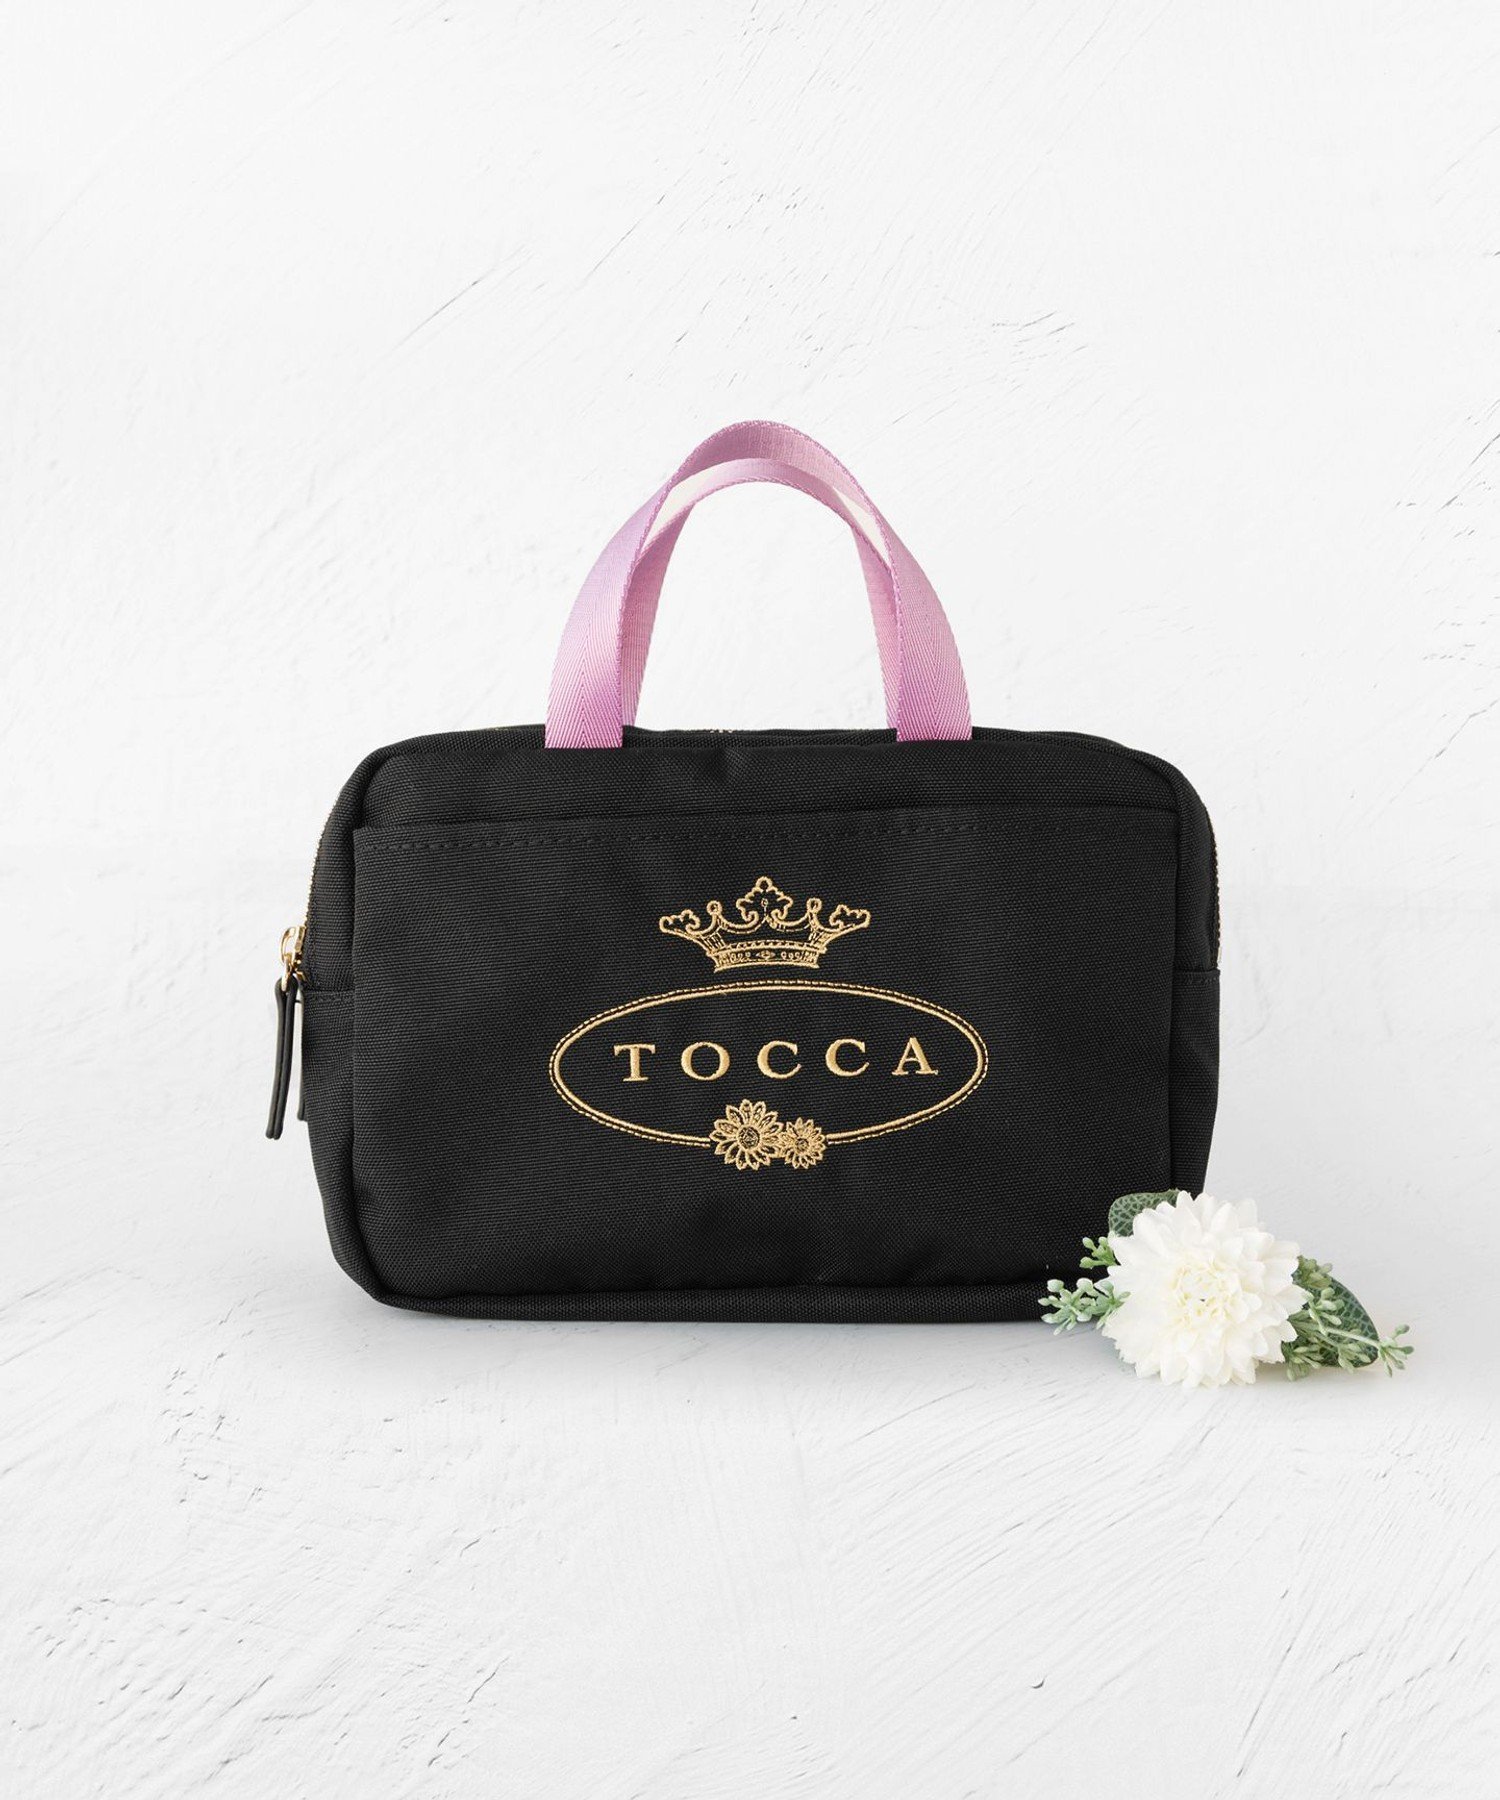 TOCCA LOGO POUCH BAG ポーチ - レディースバッグ